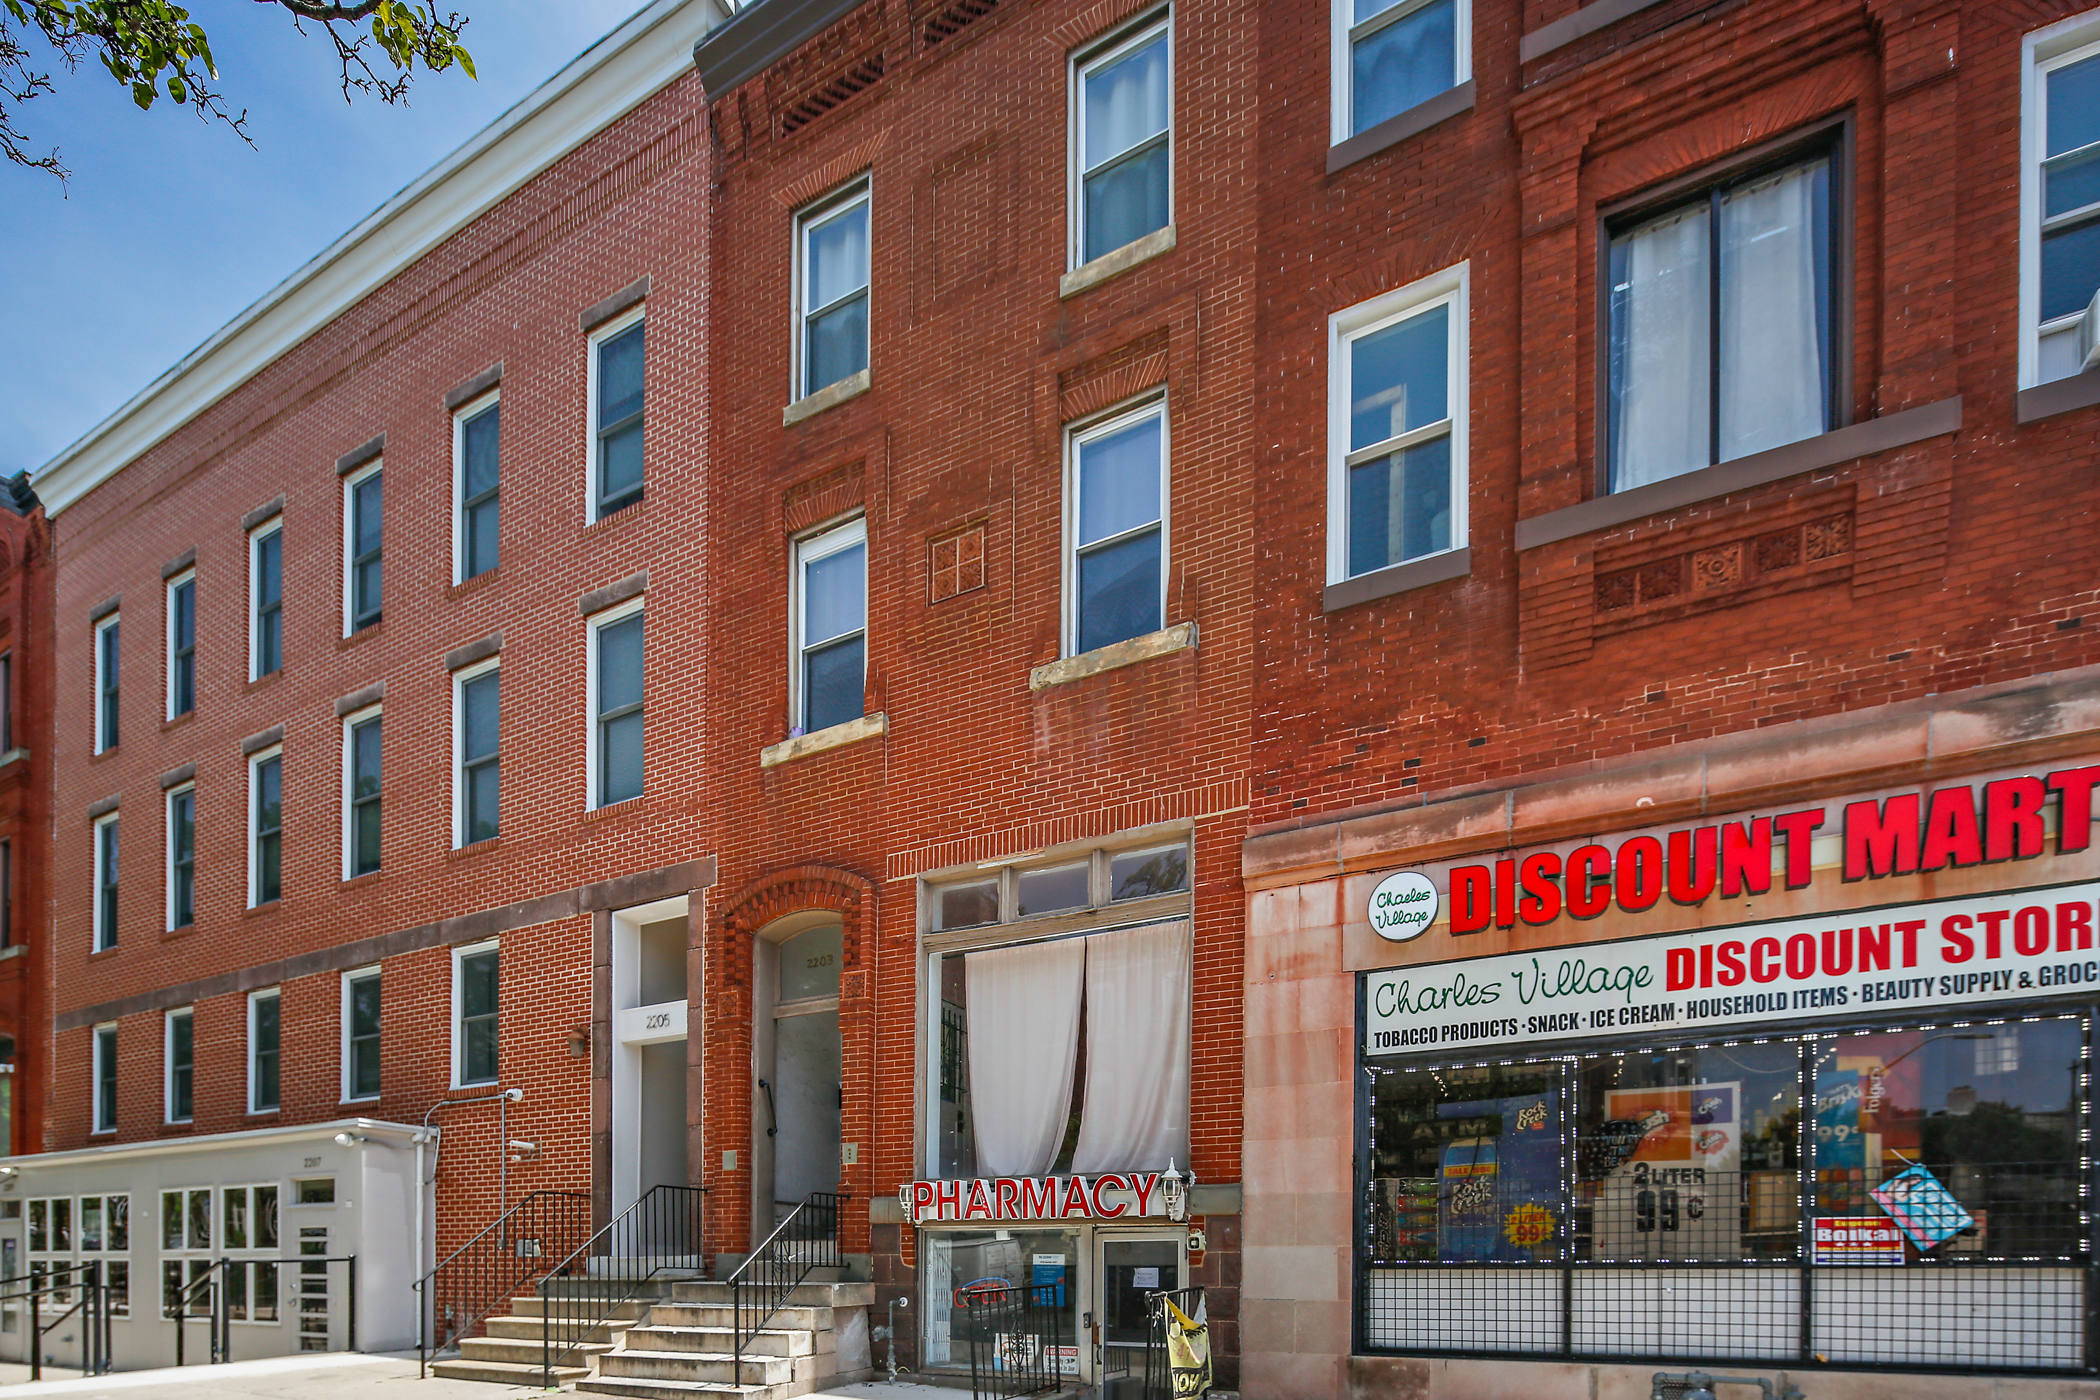 2203 North Charles Street: 4-Unit Mixed Use Building in Old Goucher